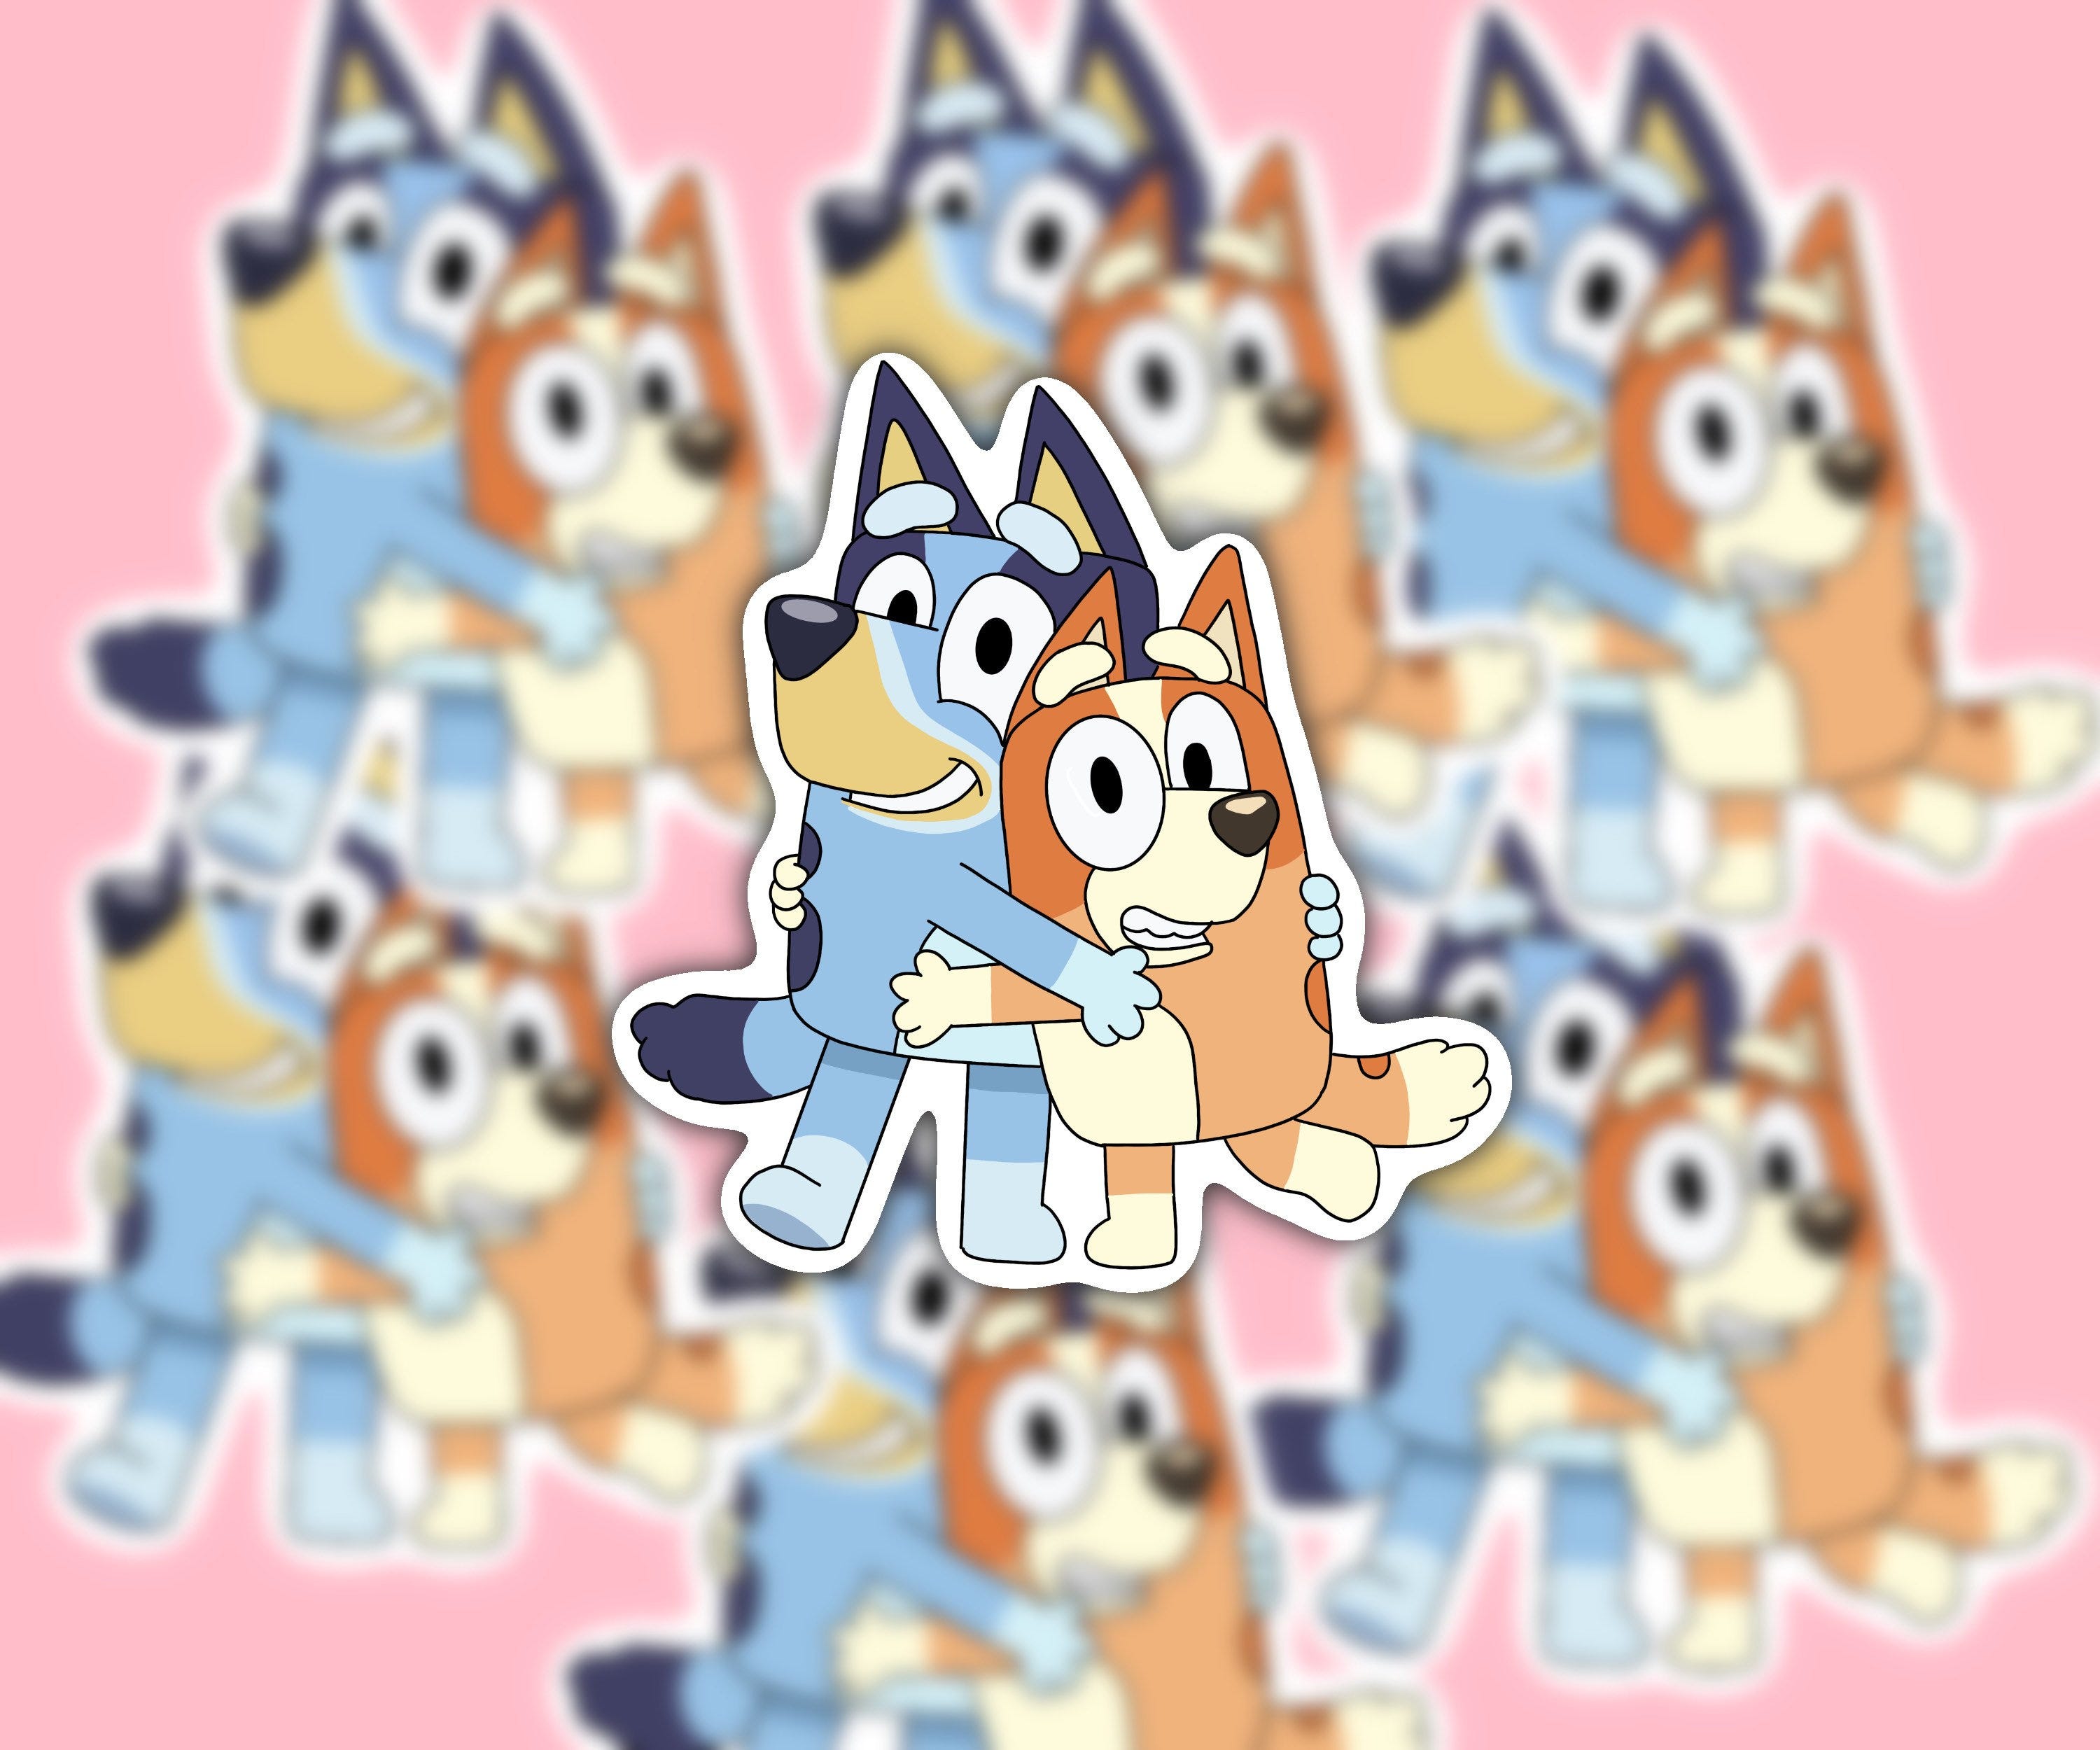 Bluey, cartoon, stickers, show stickers, cute, Heelers, dogs, sister love, waterproof stickers, blues inspired, hydroflask stickers,